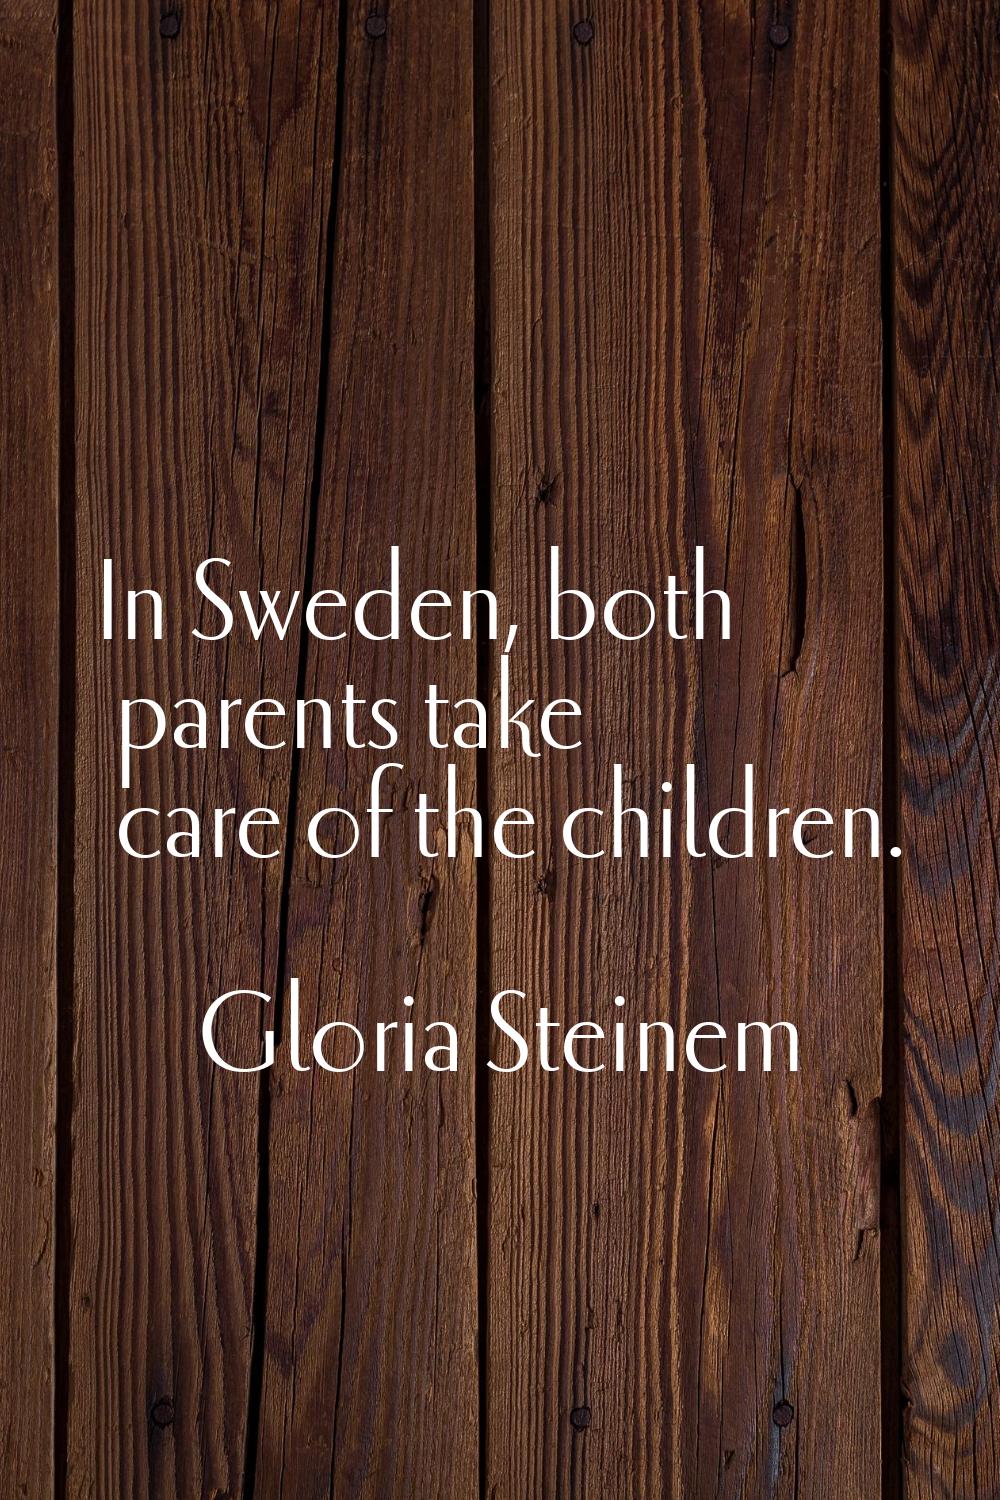 In Sweden, both parents take care of the children.